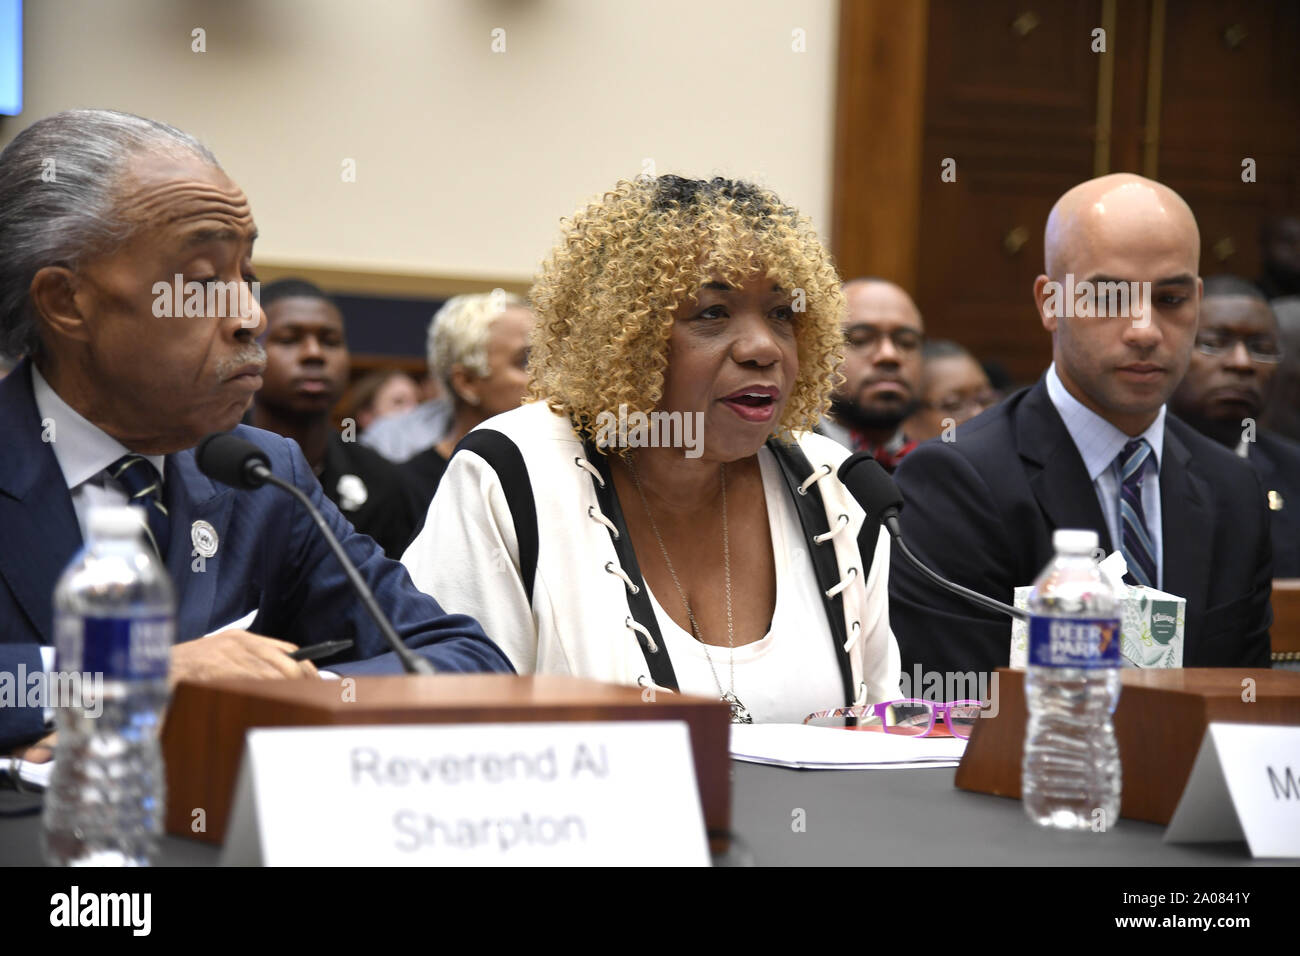 Washington, United States. 19th Sep, 2019. National Action Network's Rev. Al Sharpton (L) listens to opening statement by Gwen Carr (C) as former tennis player James Blake also listens at the House Judiciary Committee, on Capitol Hill, Thursday, September 19, 2019, in Washington, DC. The panel was hearing testimony on police practices and Carr's son Eric Garner died in a police chokehold during an arrest on Staten Island, New York and Blake was roughed up in a mistaken arrest in New York City. Photo by Mike Theiler/ Credit: UPI/Alamy Live News Stock Photo